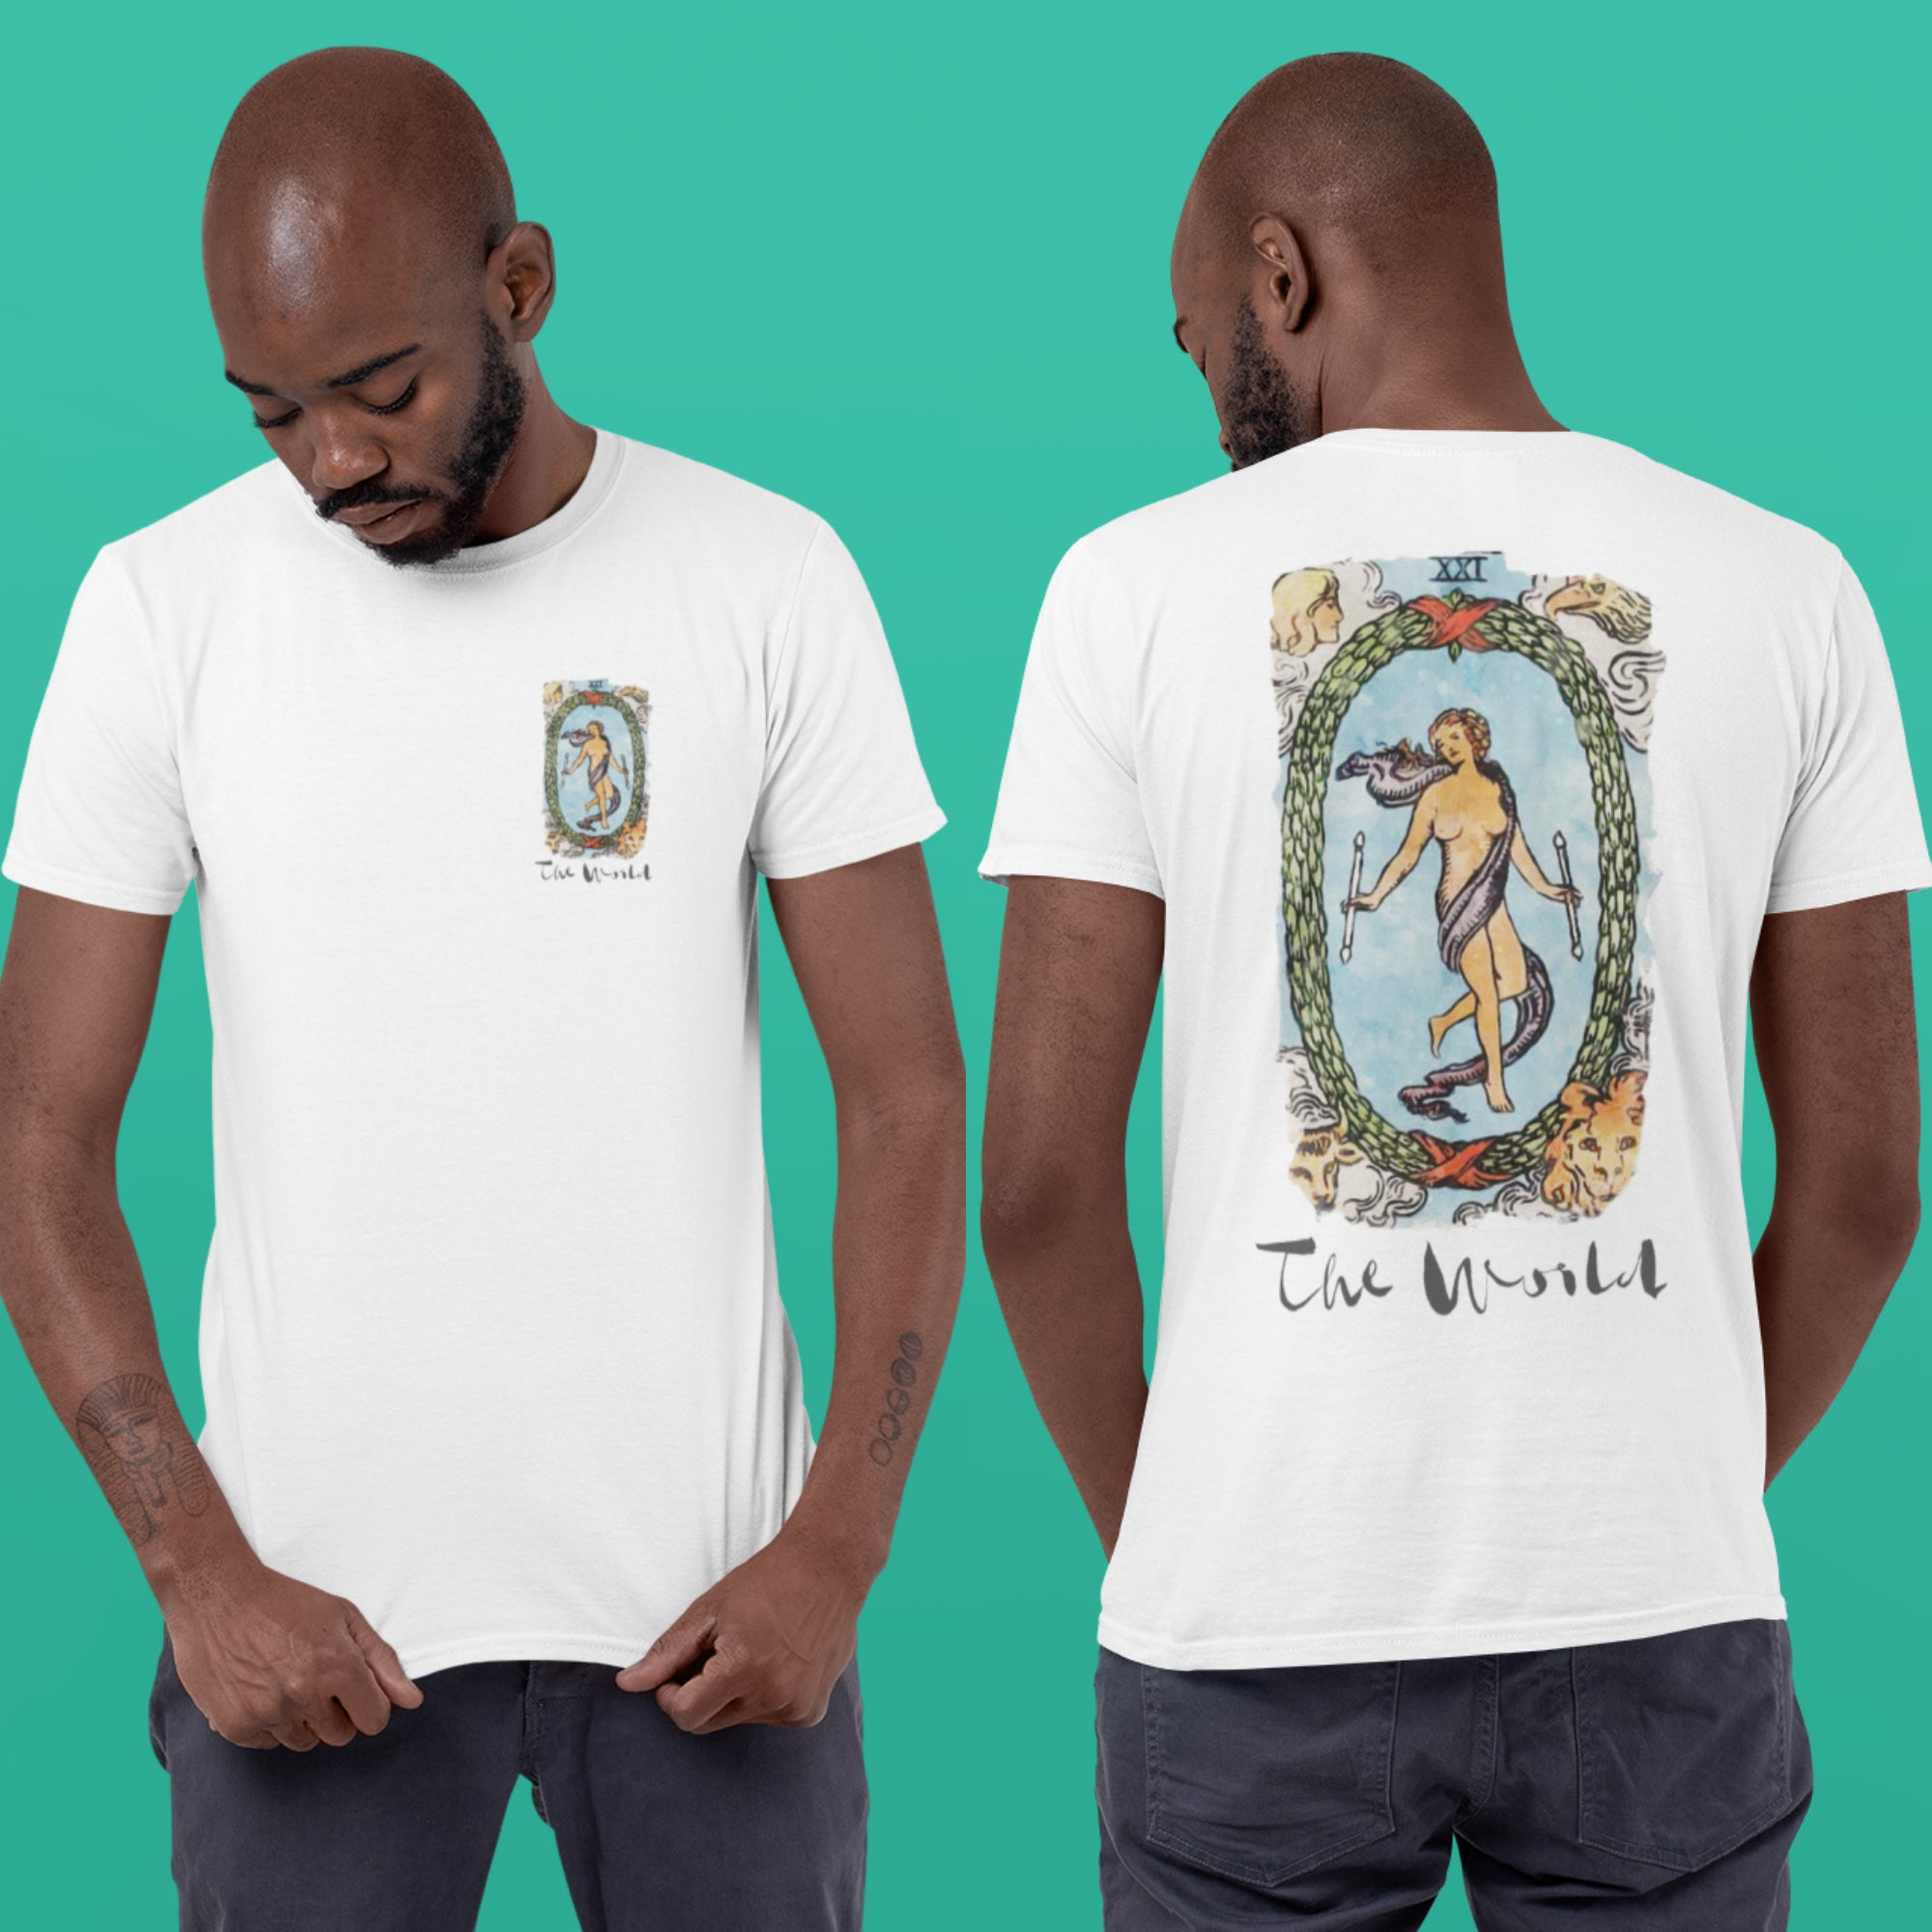 Tarot Card T-Shirt | White Unisex Tees With Front And Back Prints Of Major Arcana Cards | Witchy Shirts For Spiritual Men And Women | Apollo Tarot Shop